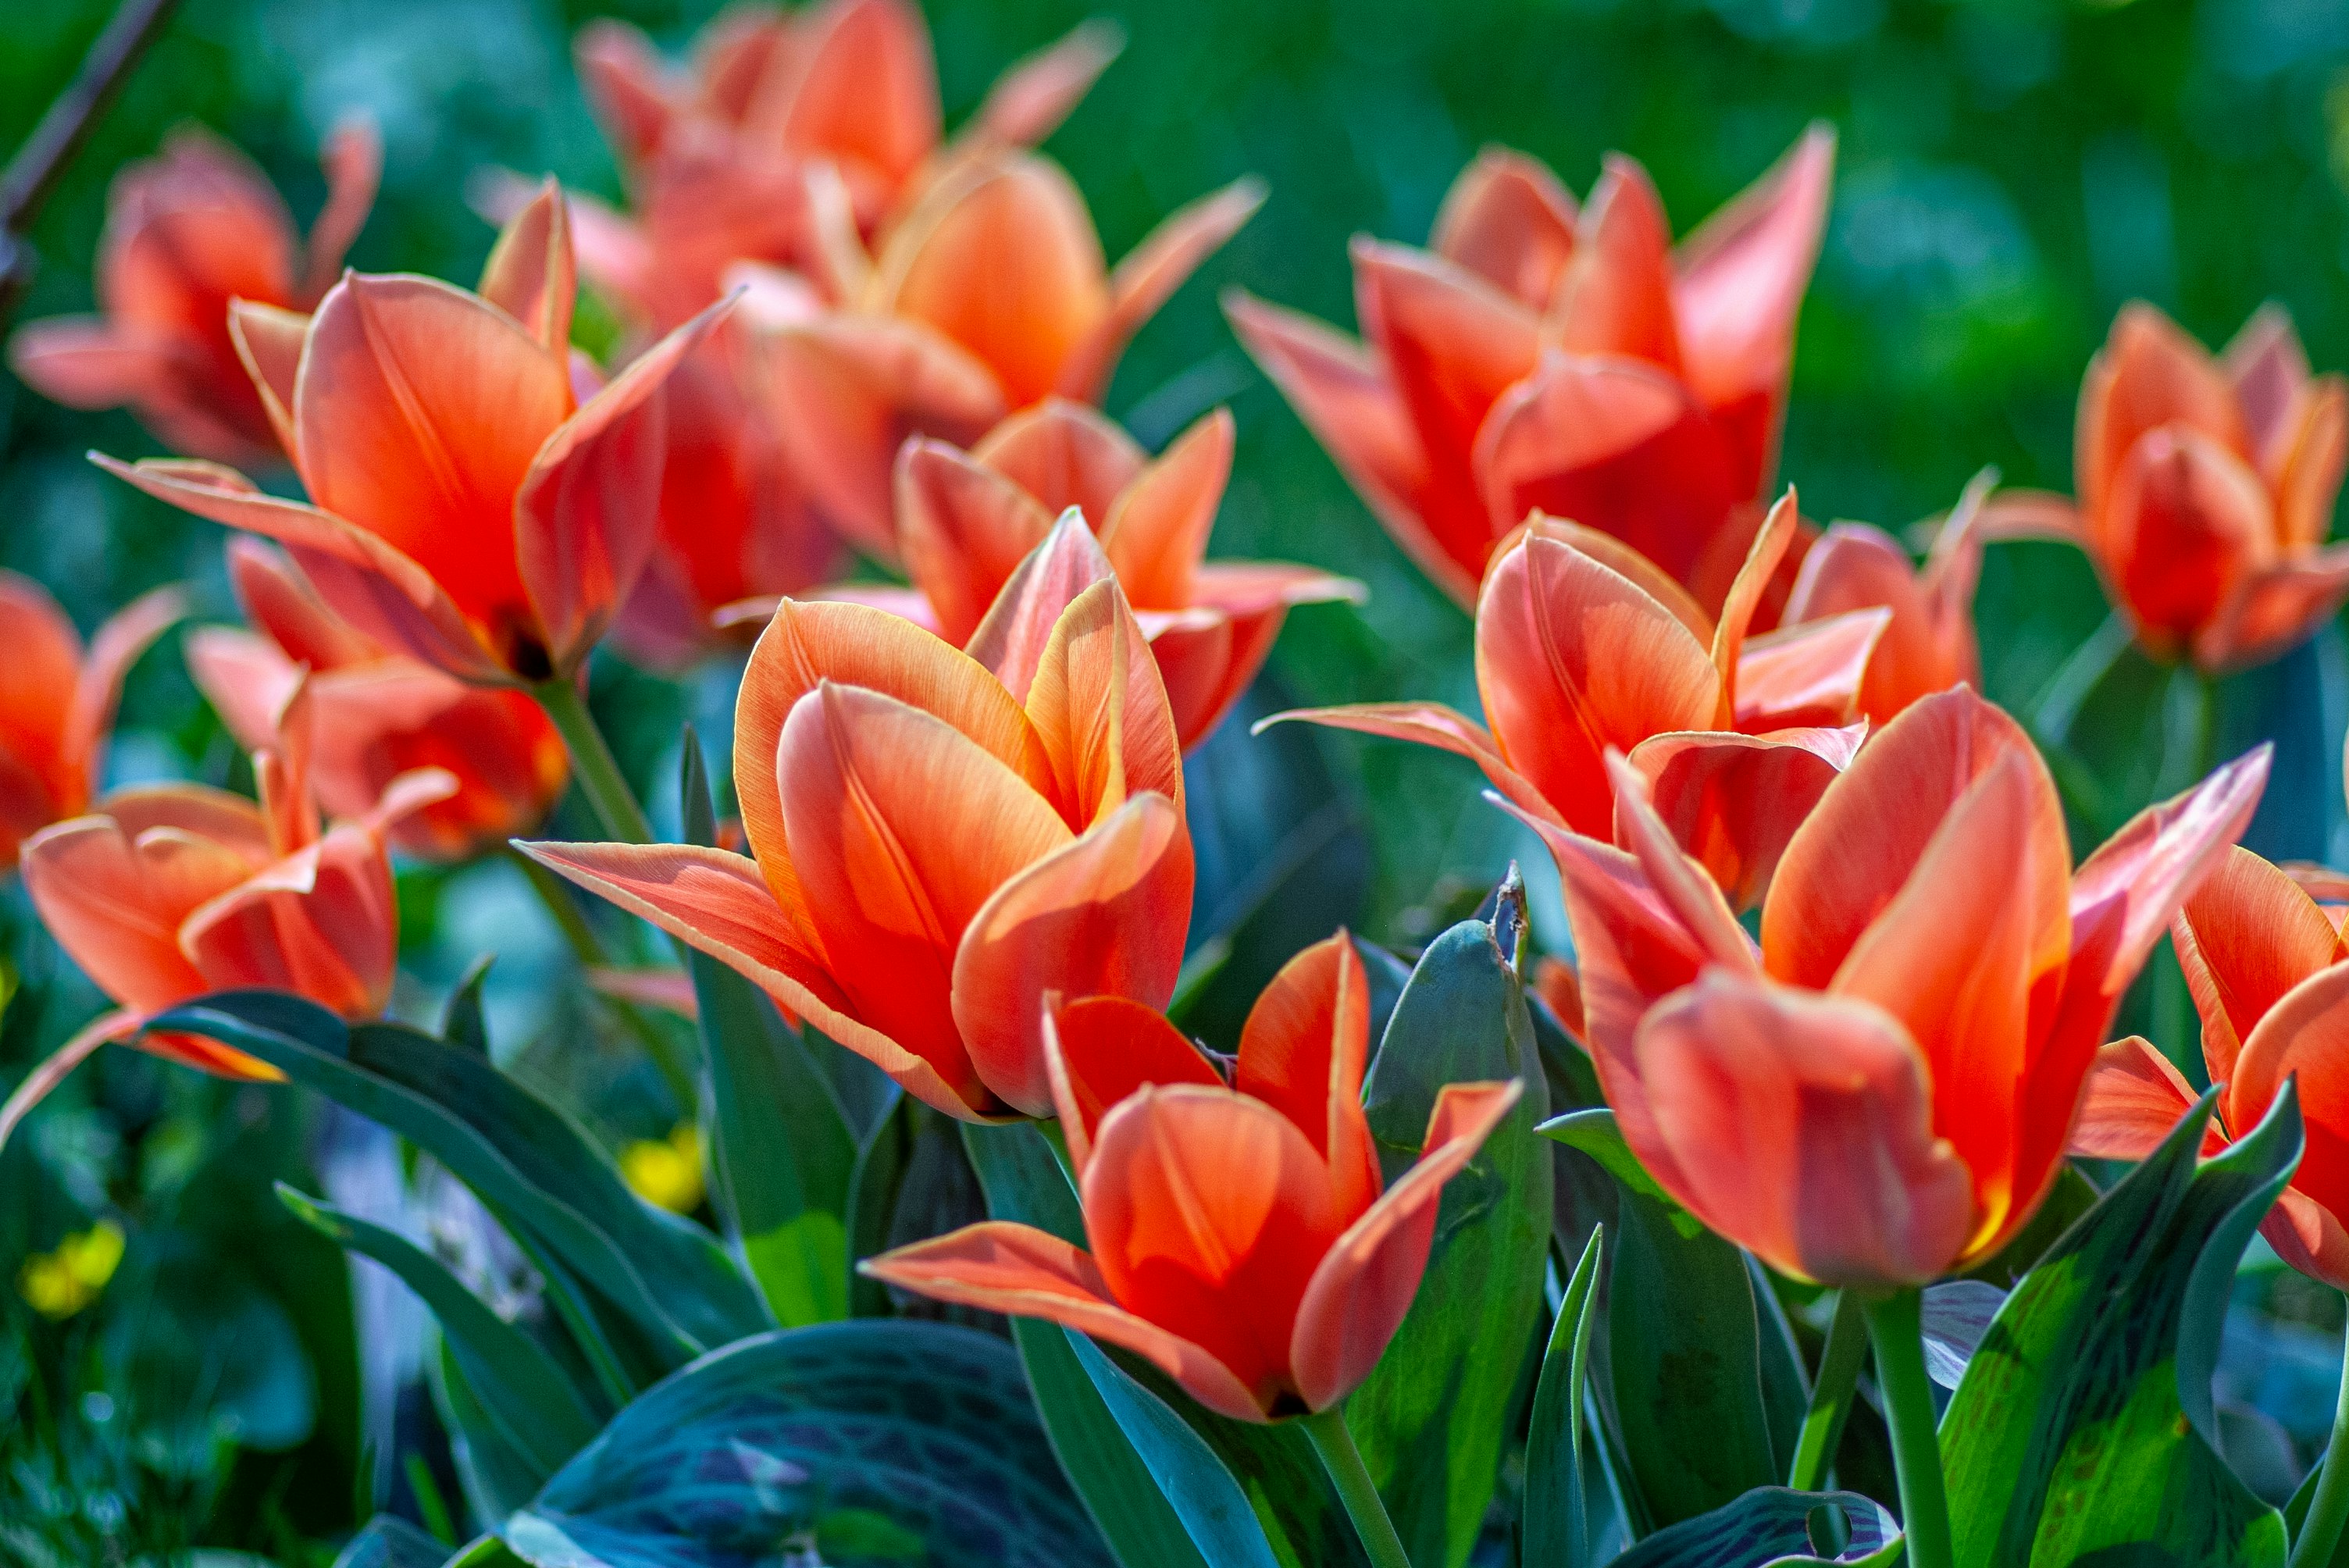 orange tulips in close up photography